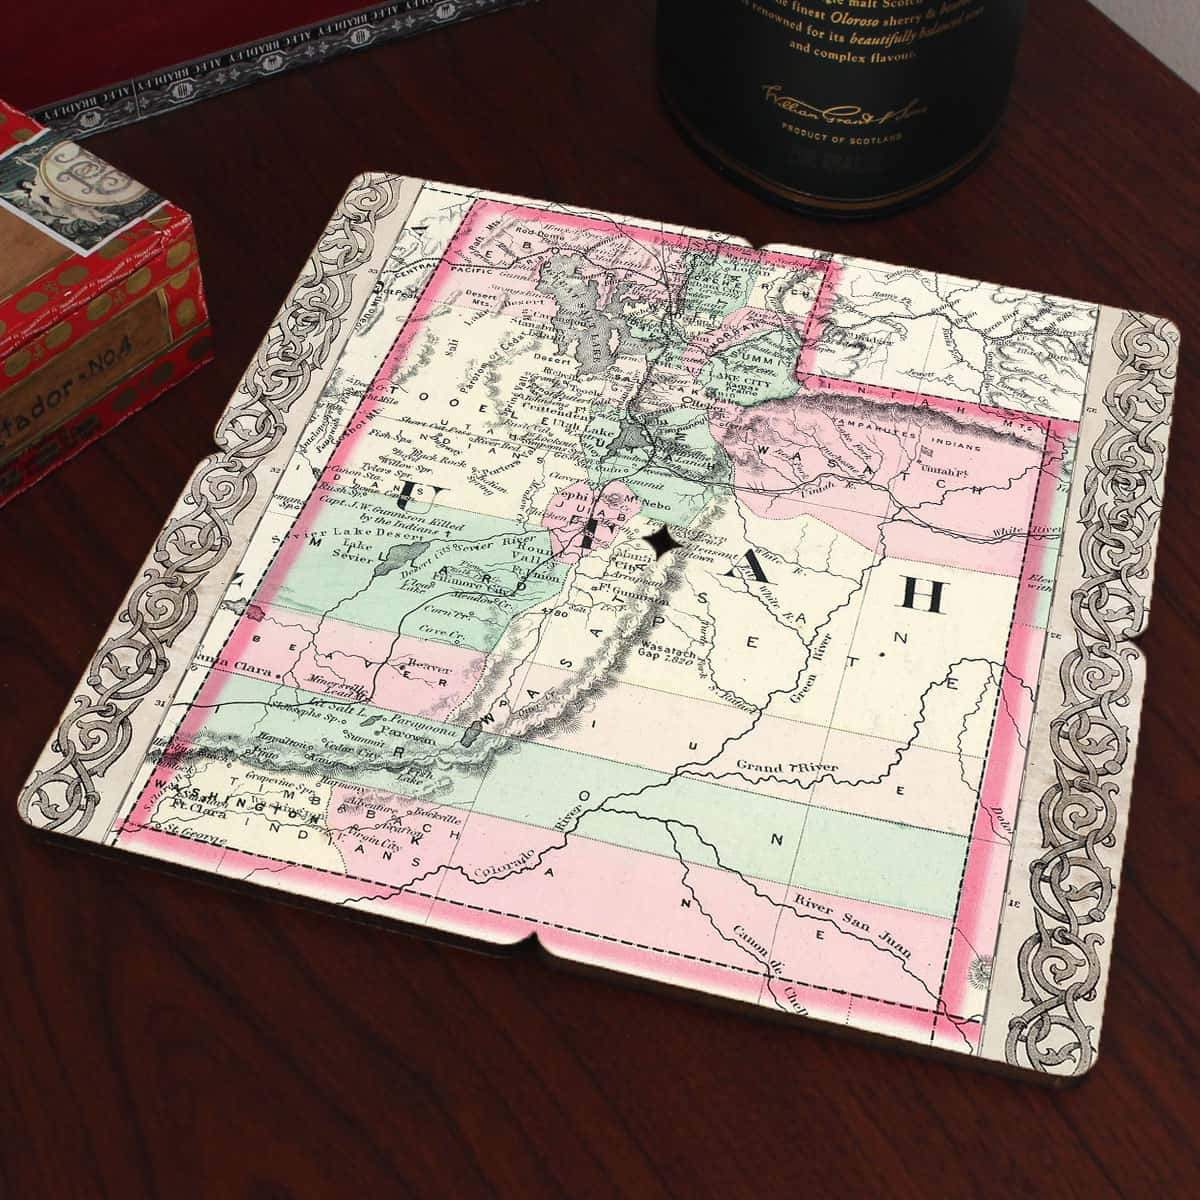 Torched Products Coasters Utah Old World Map Coaster (790603038837)